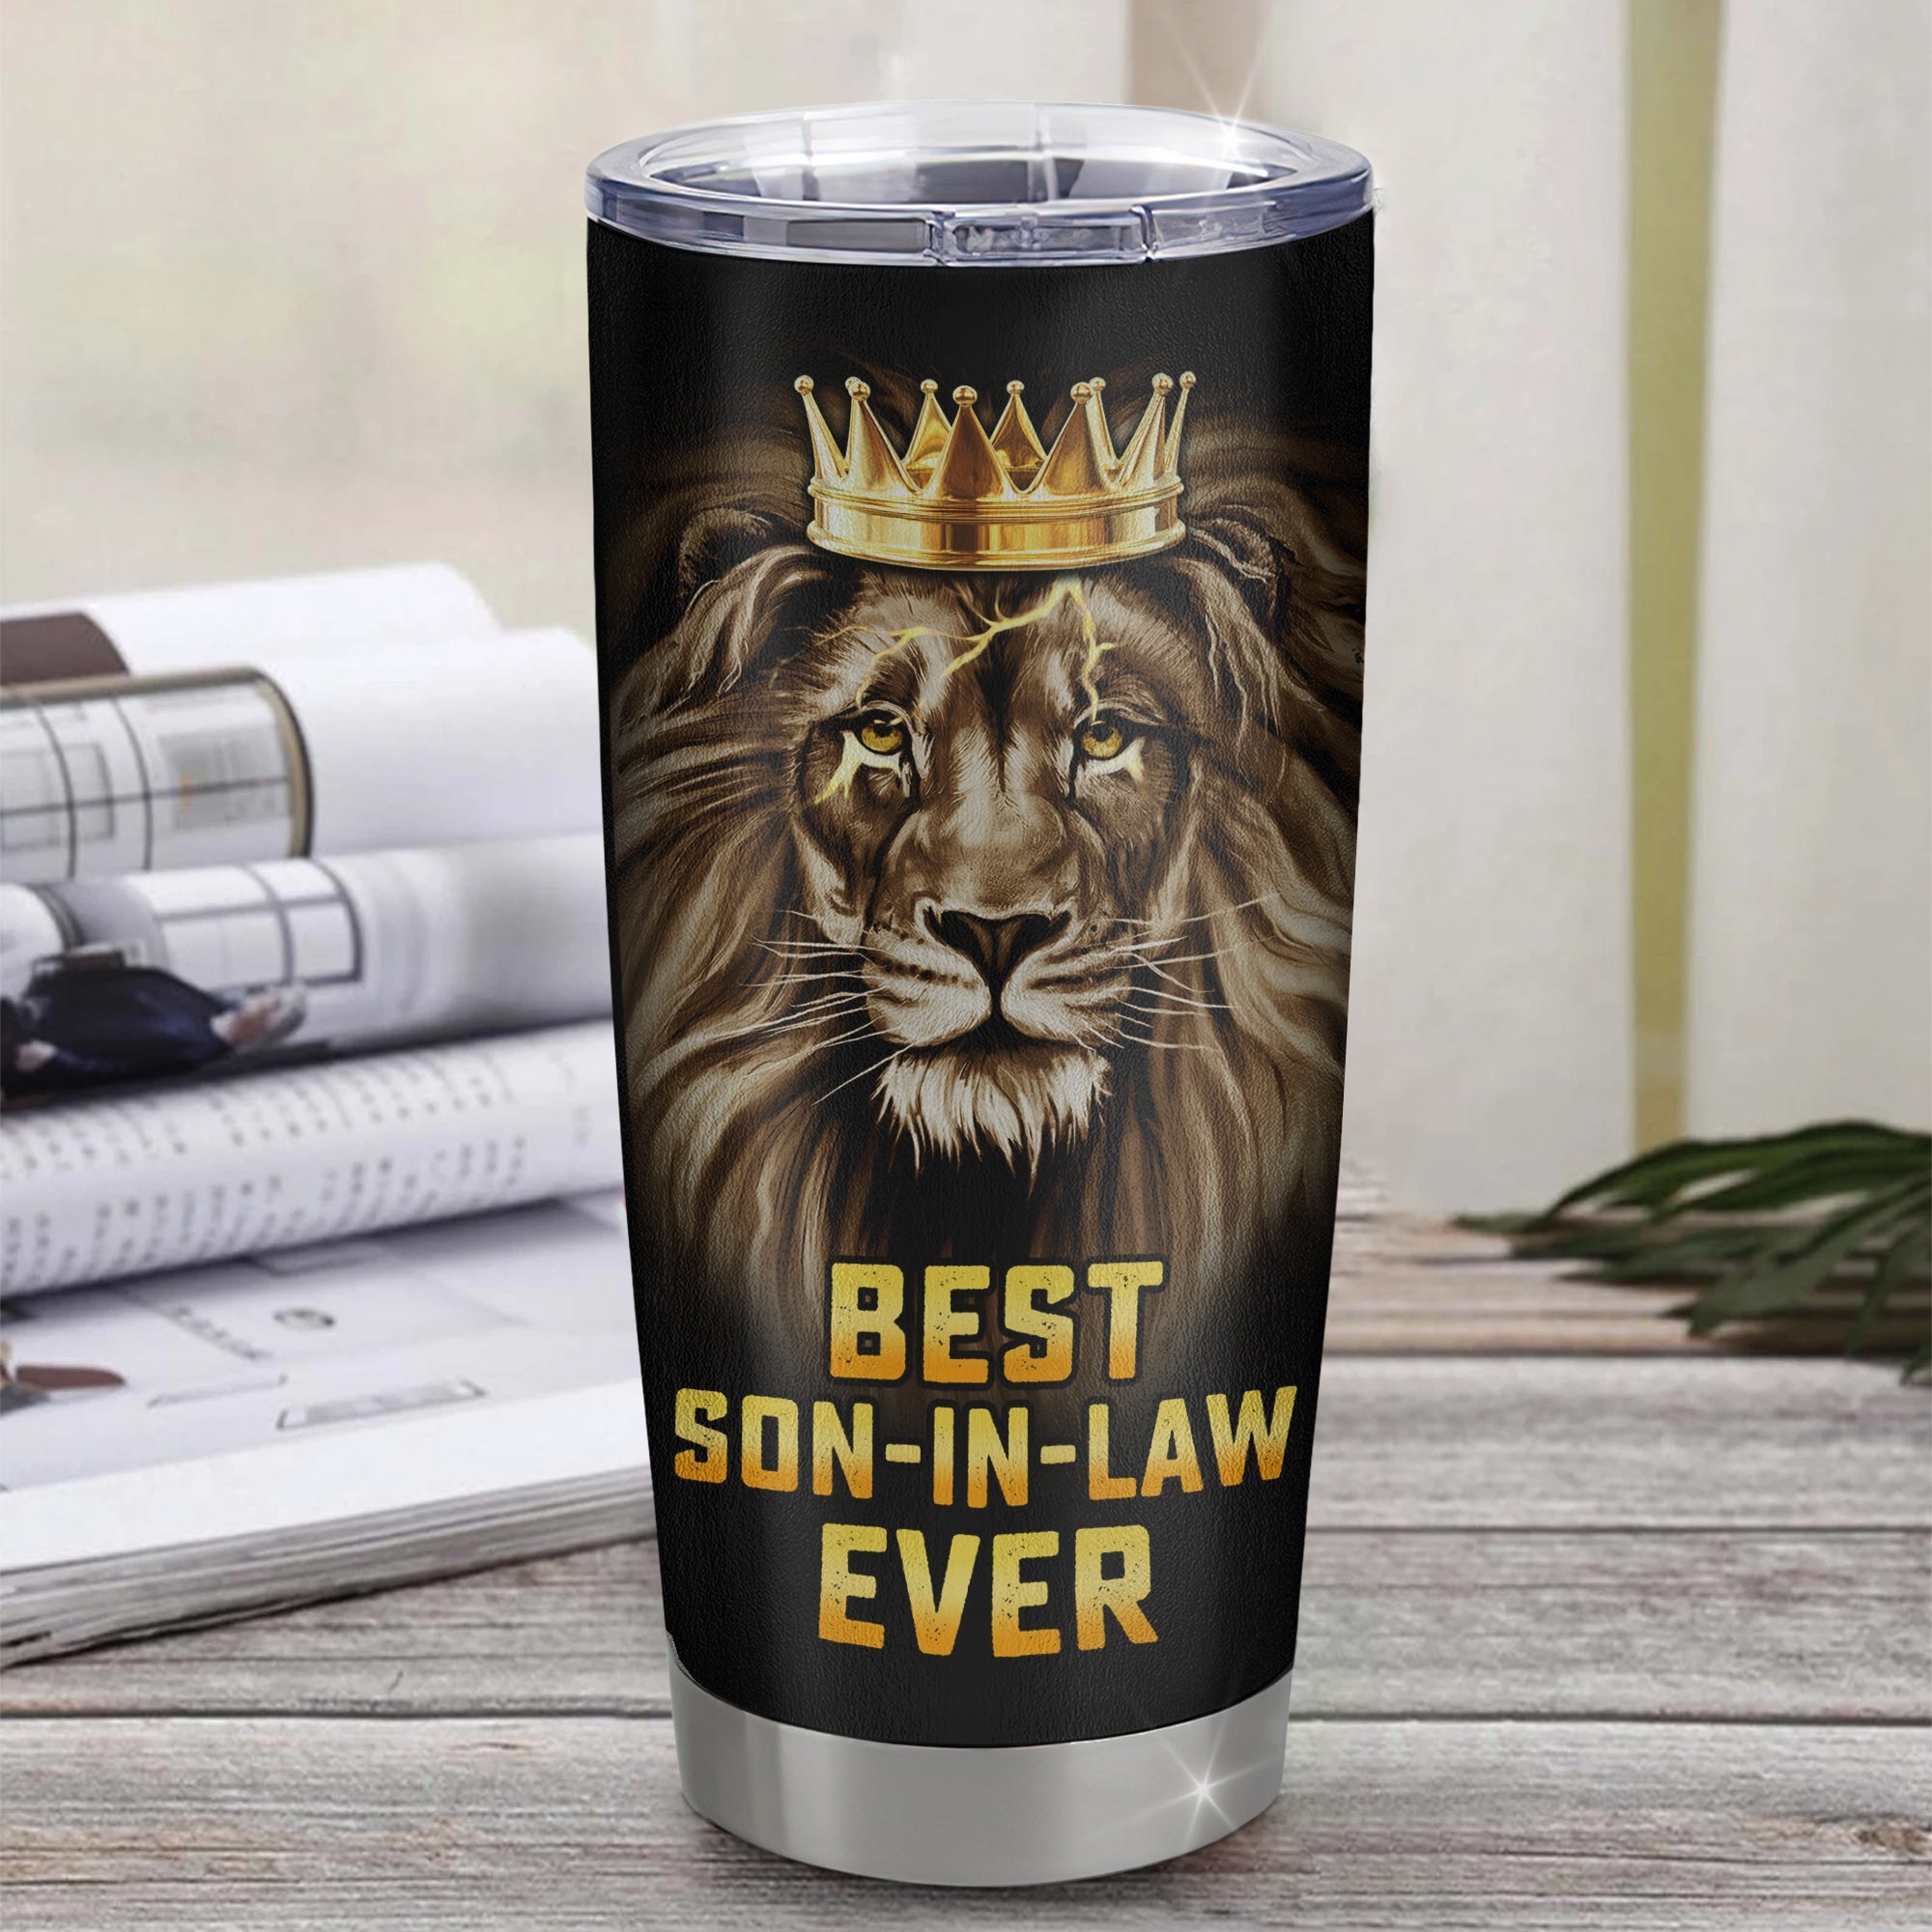 Personalized_To_My_Son_In_Law_From_Mom_Mother_In_Law_Stainless_Steel_Tumbler_Cup_I_Didn_t_Give_You_The_Gift_Of_Life_Lion_Son_In_Law_Birthday_Christmas_Travel_Mug_Tumbler_mockup_1.jpg